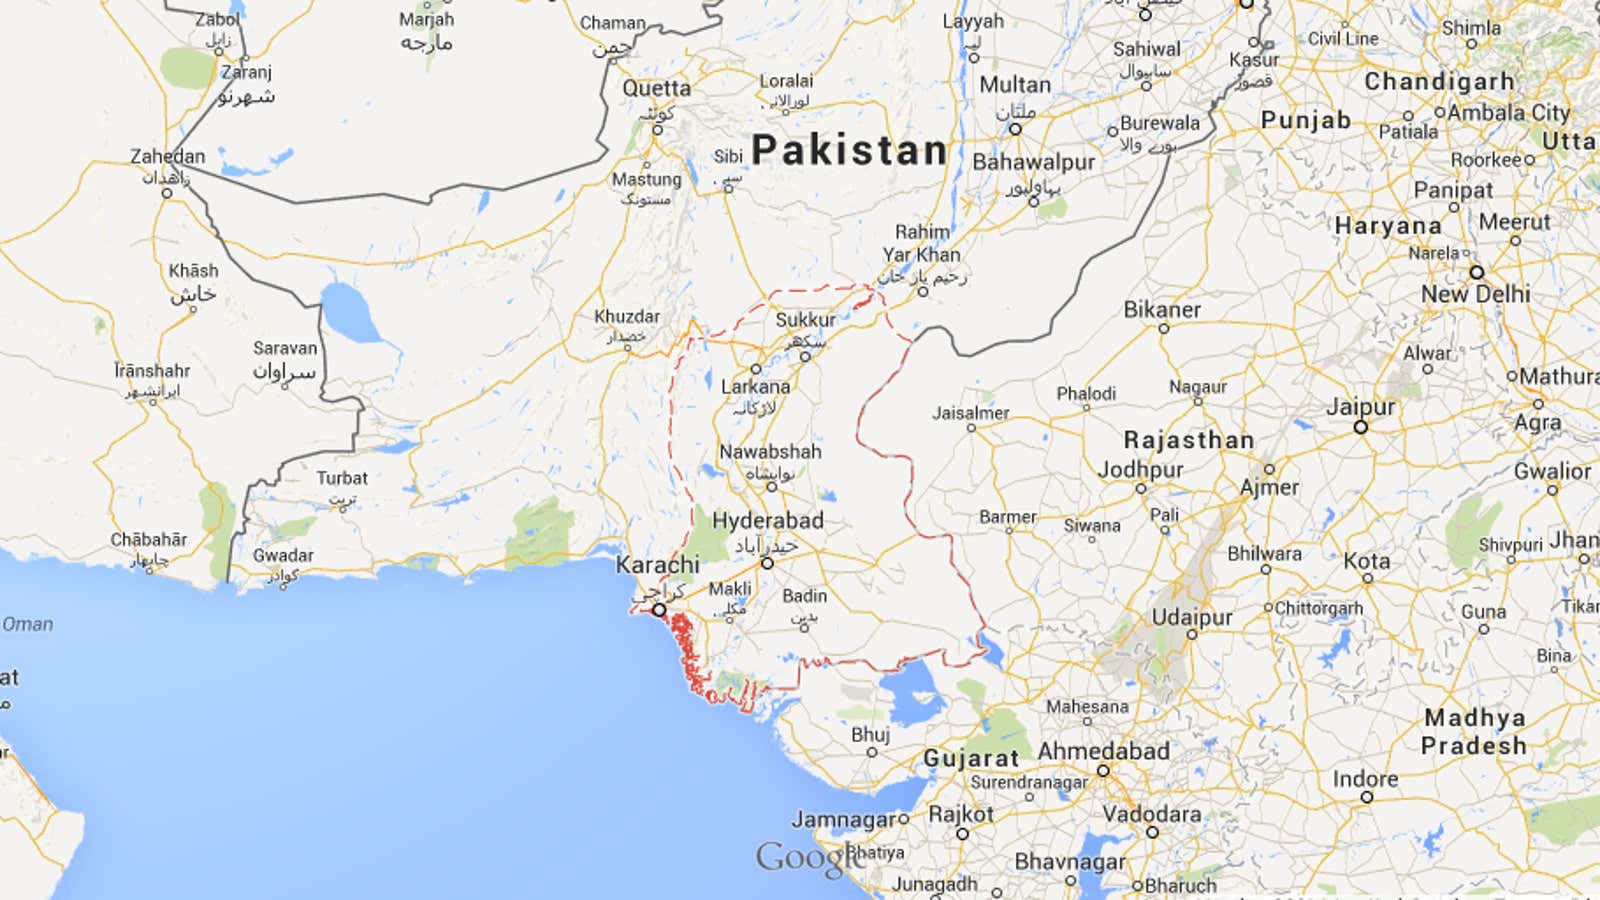 Sindh, Pakistan, the region where a Taliban spokesman was tweeting from. Oops.